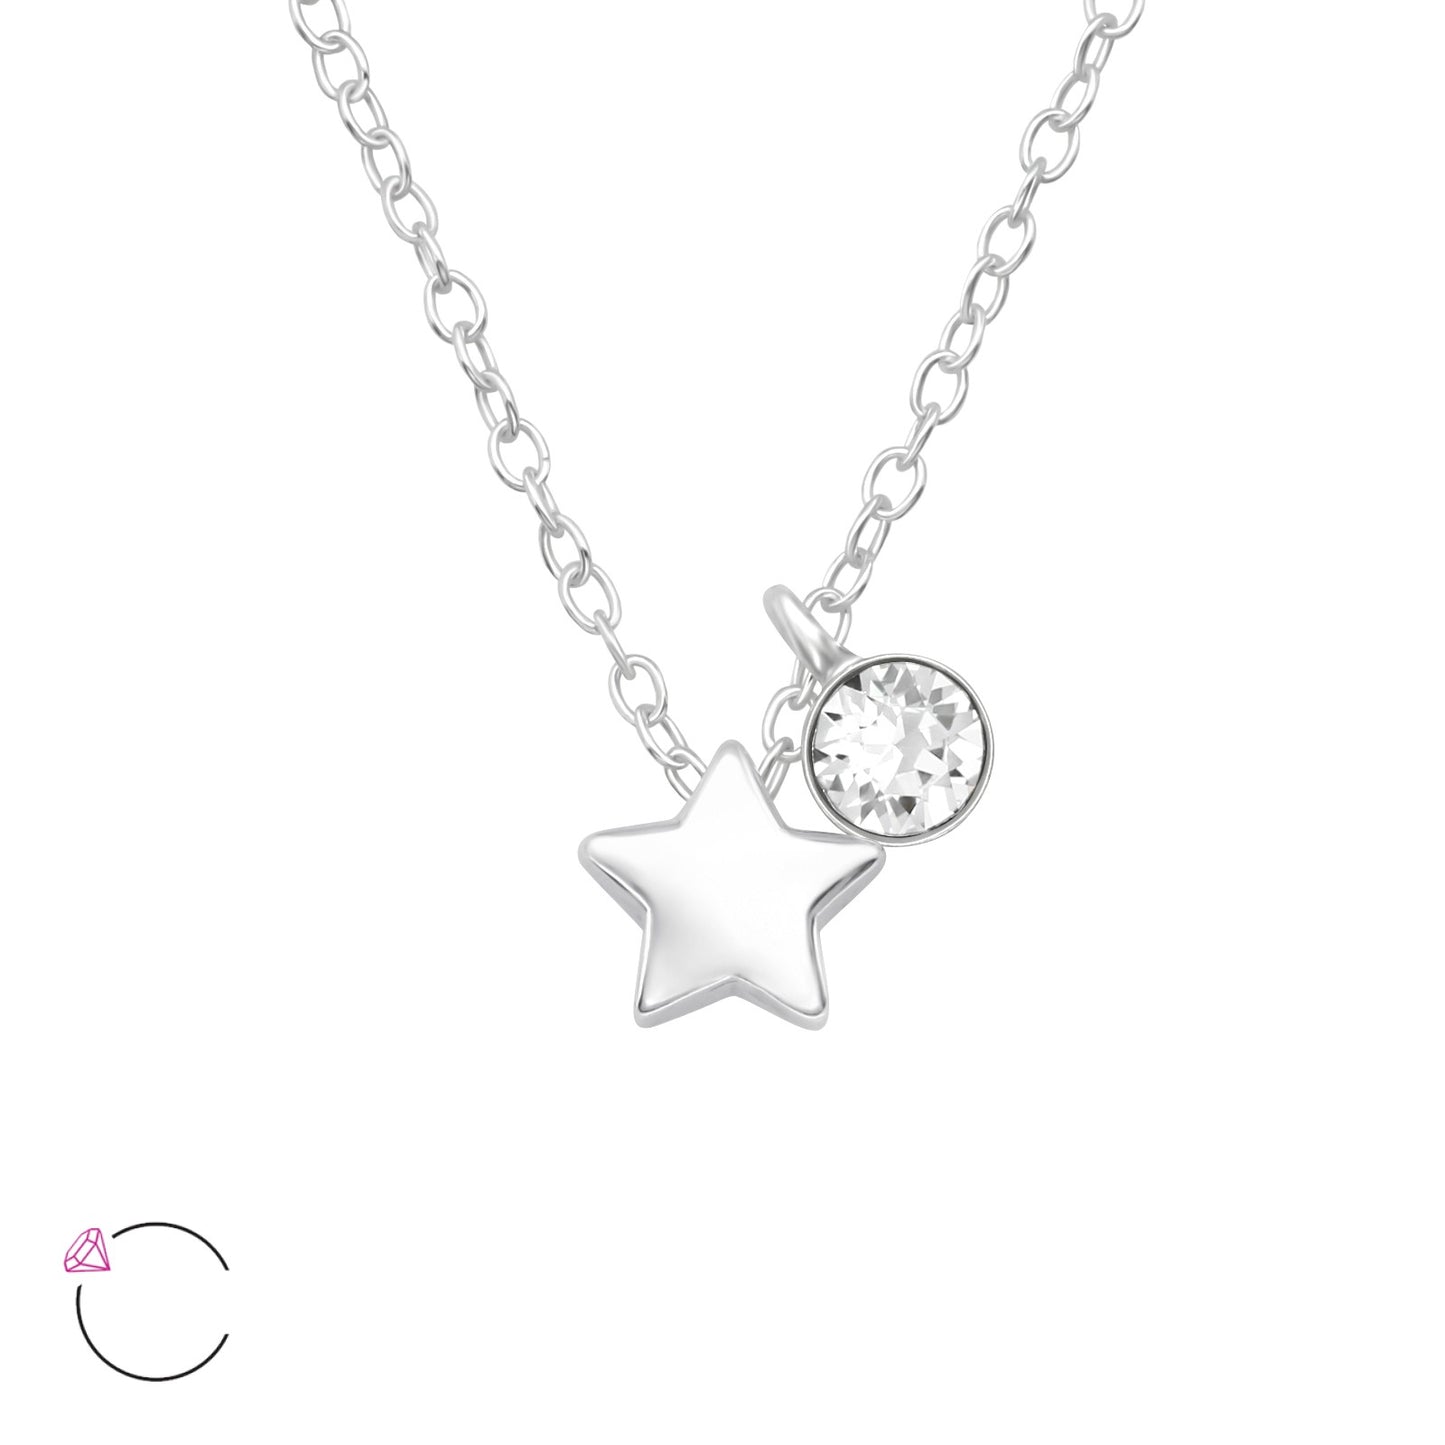 WOMEN'S SILVER STAR STERLING SILVER NECKLACE: MINI TINY STAR